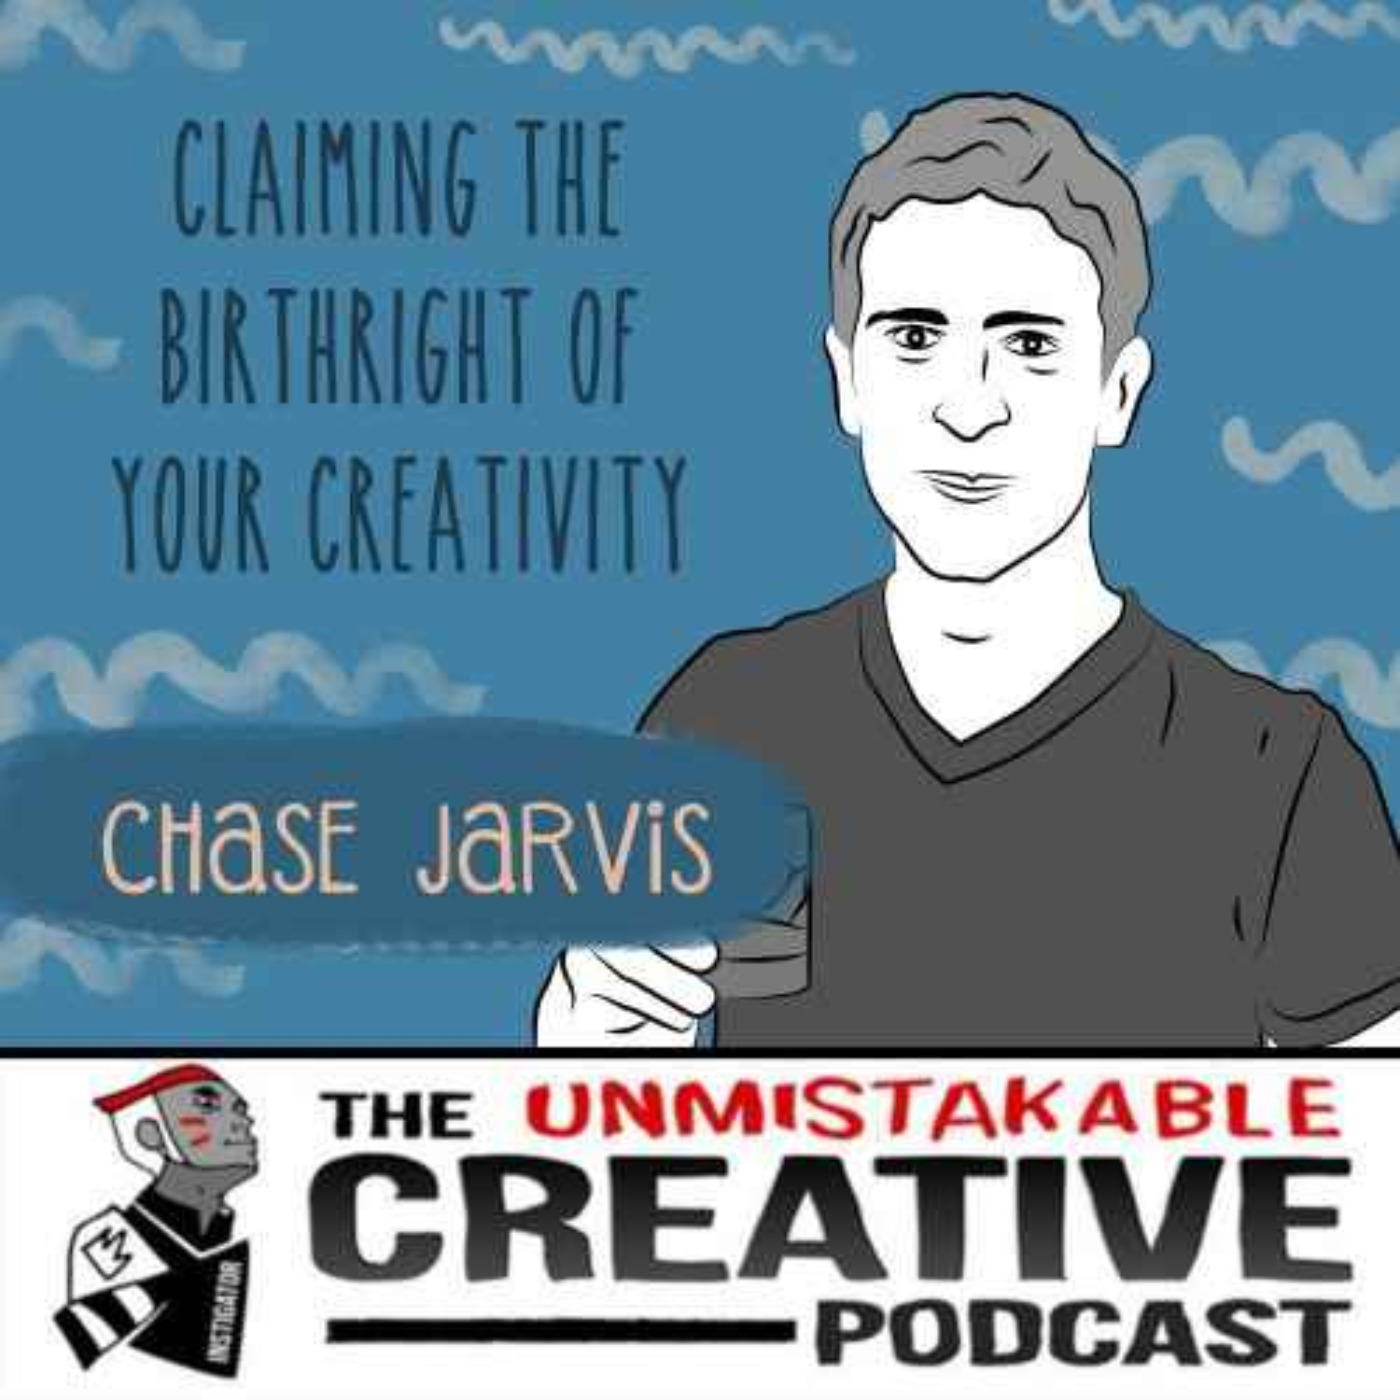 The Wisdom Series: Chase Jarvis | Claiming The Birthright of Your Creativity Image